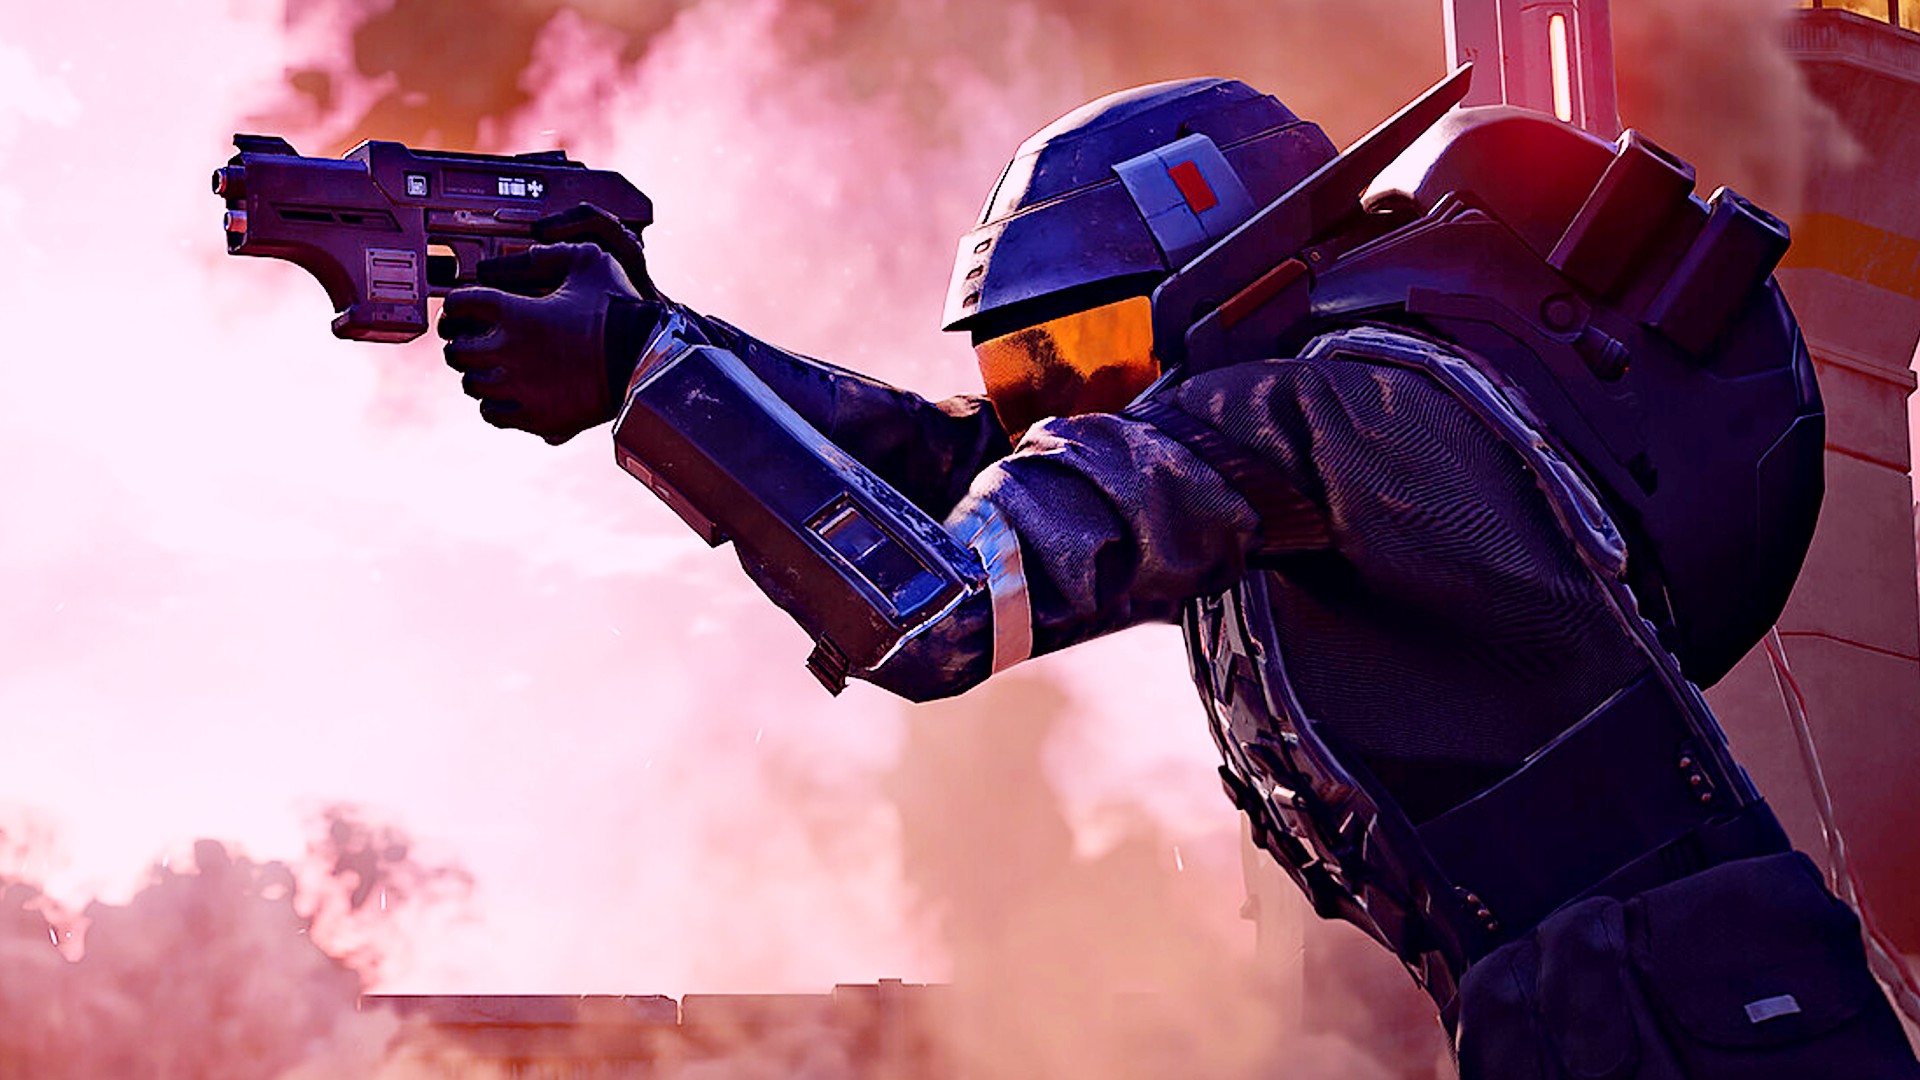 Starship Troopers: Extermination on Steam